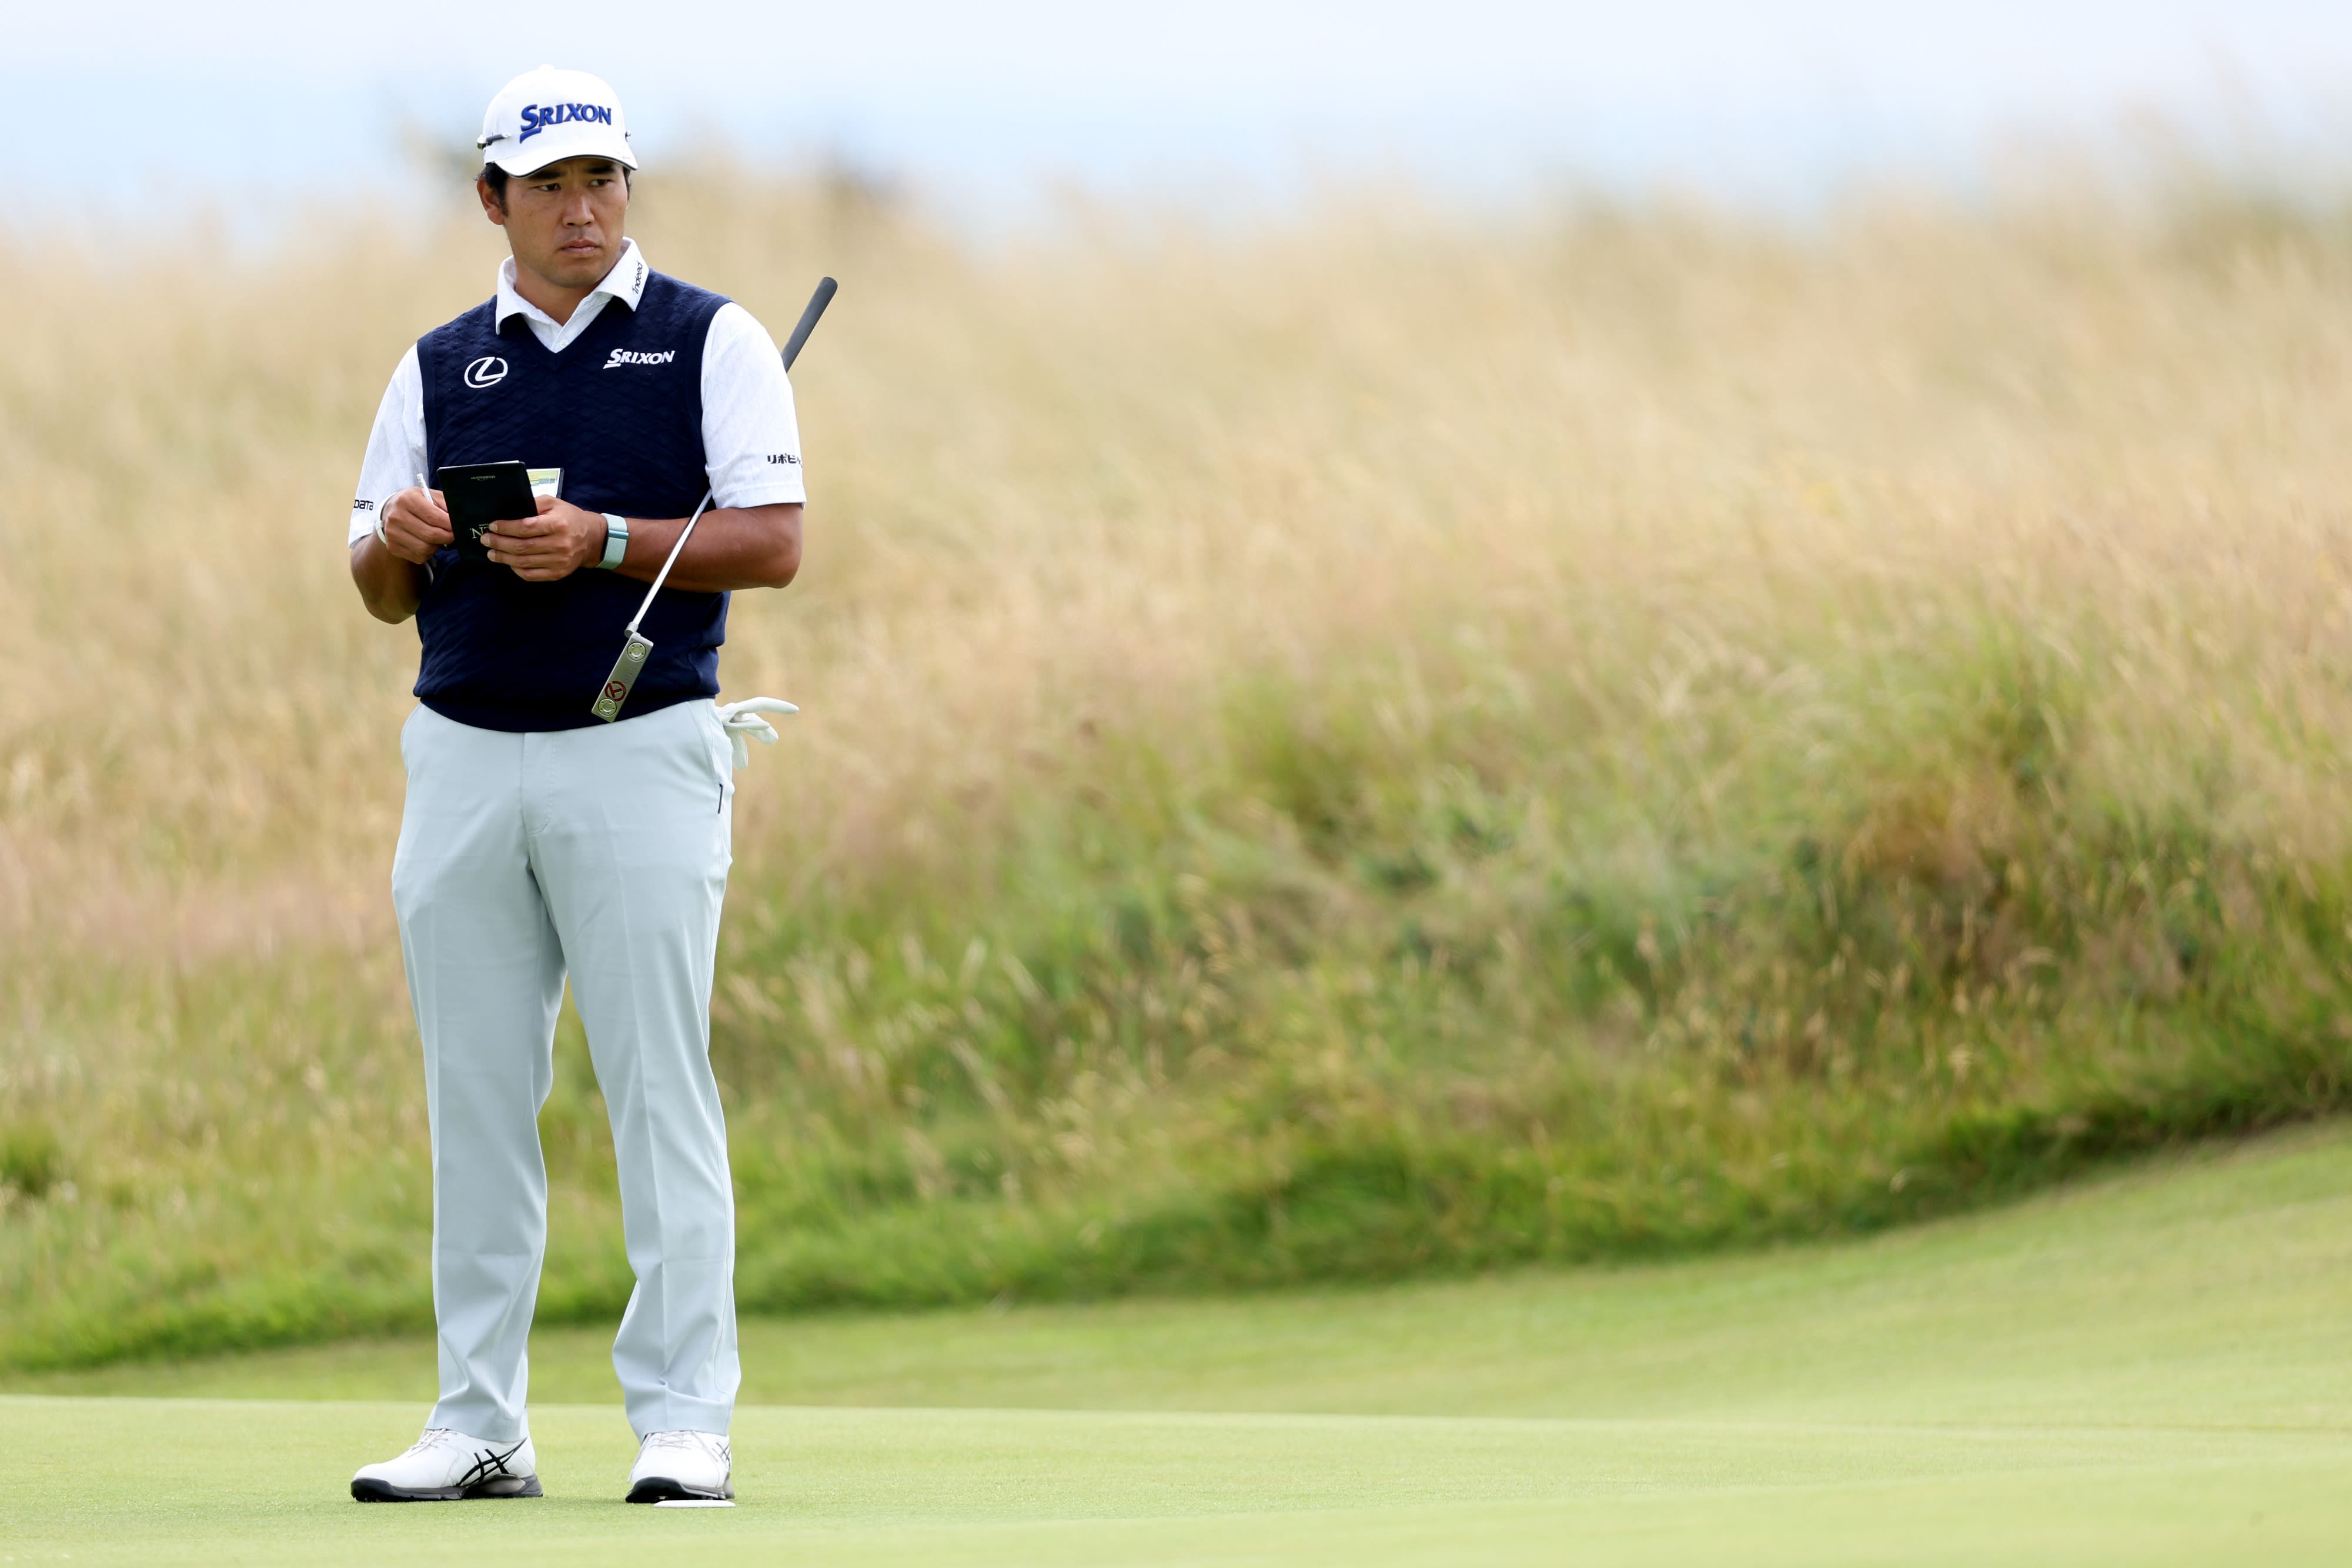 The eight best bets to win this year’s British Open